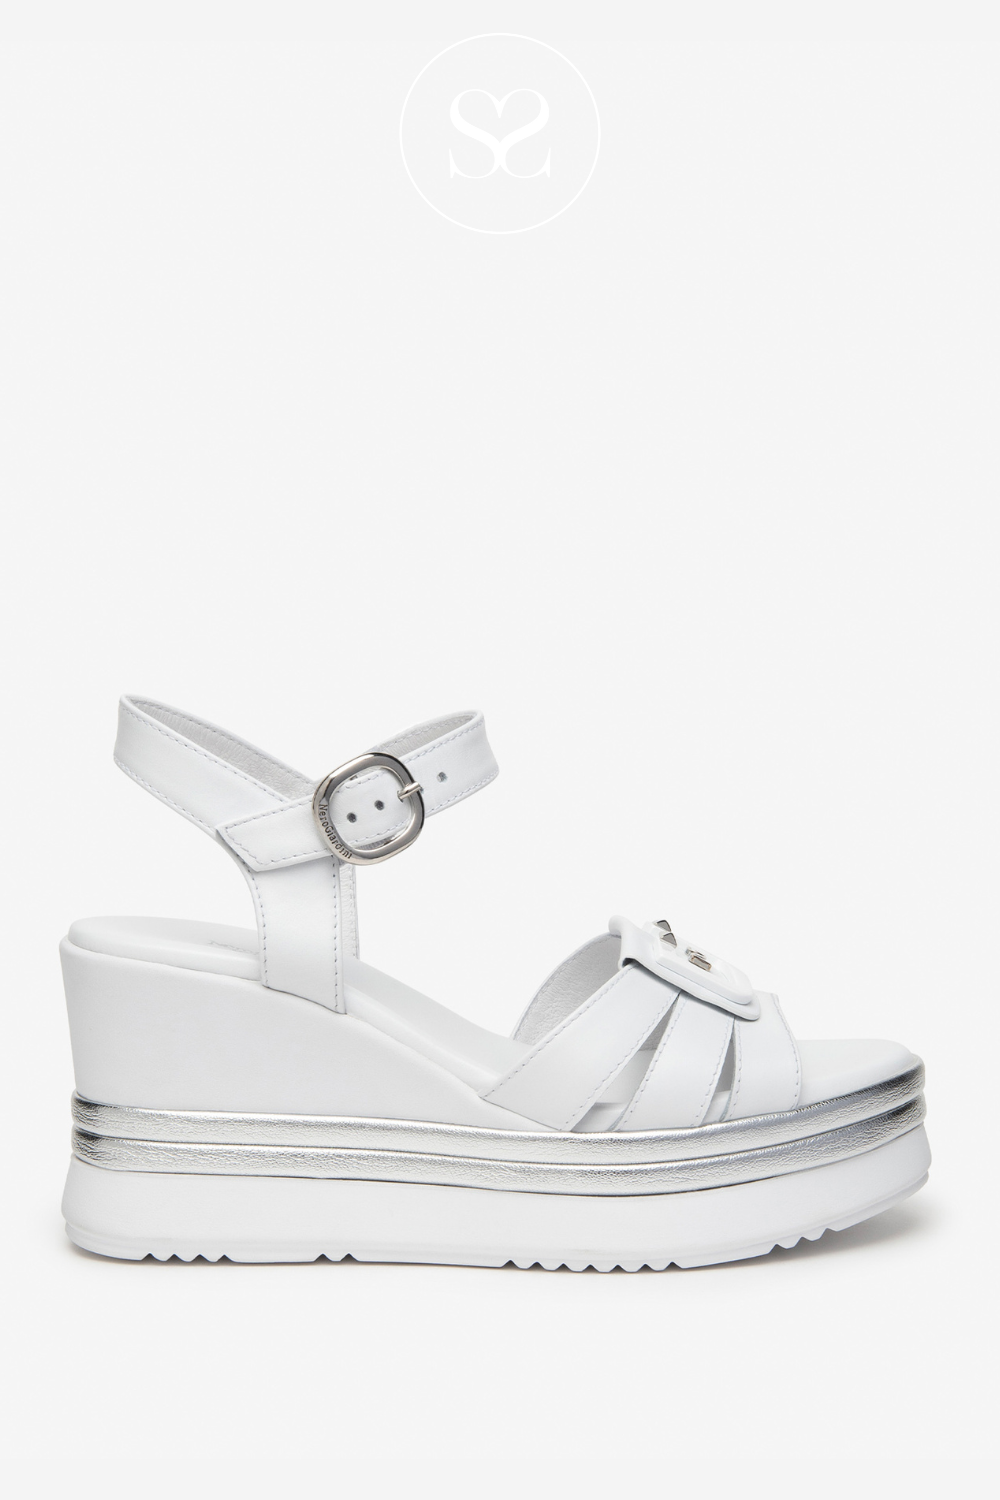 white and silver wedge sandals for women from Nero Giardini